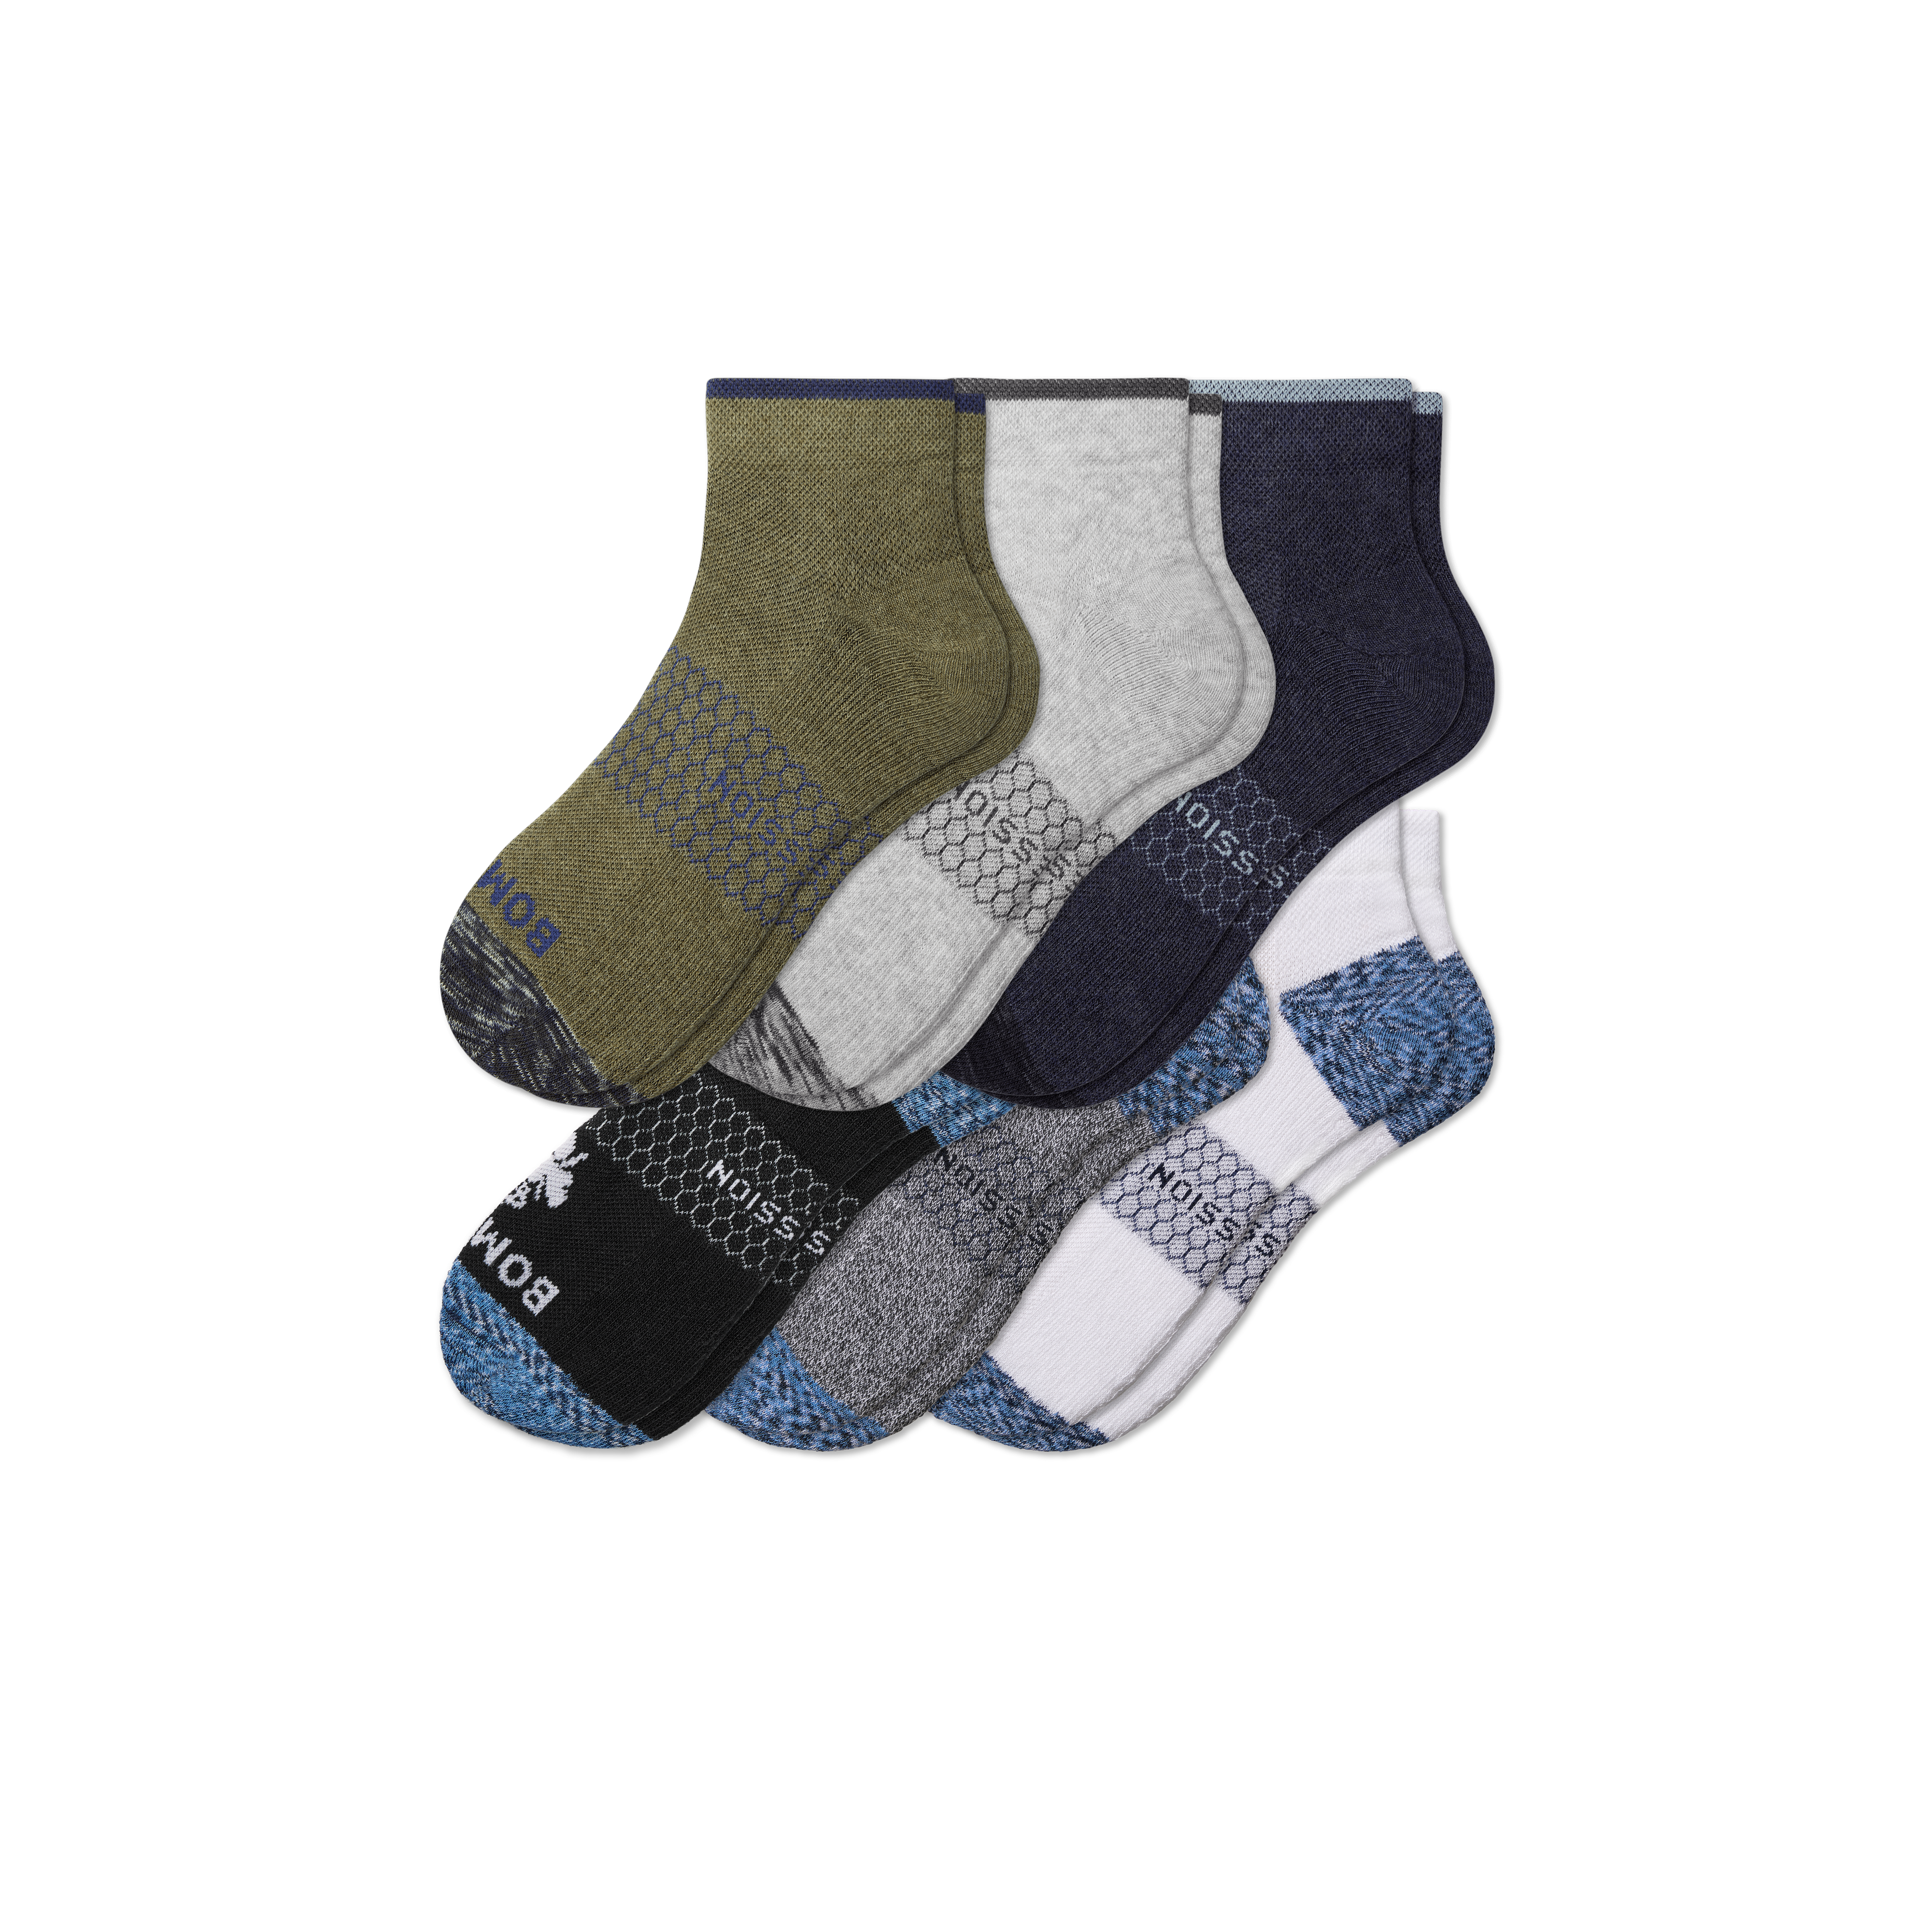 Bombas Ankle Compression Socks 6-pack In Nightfall Solids Mix